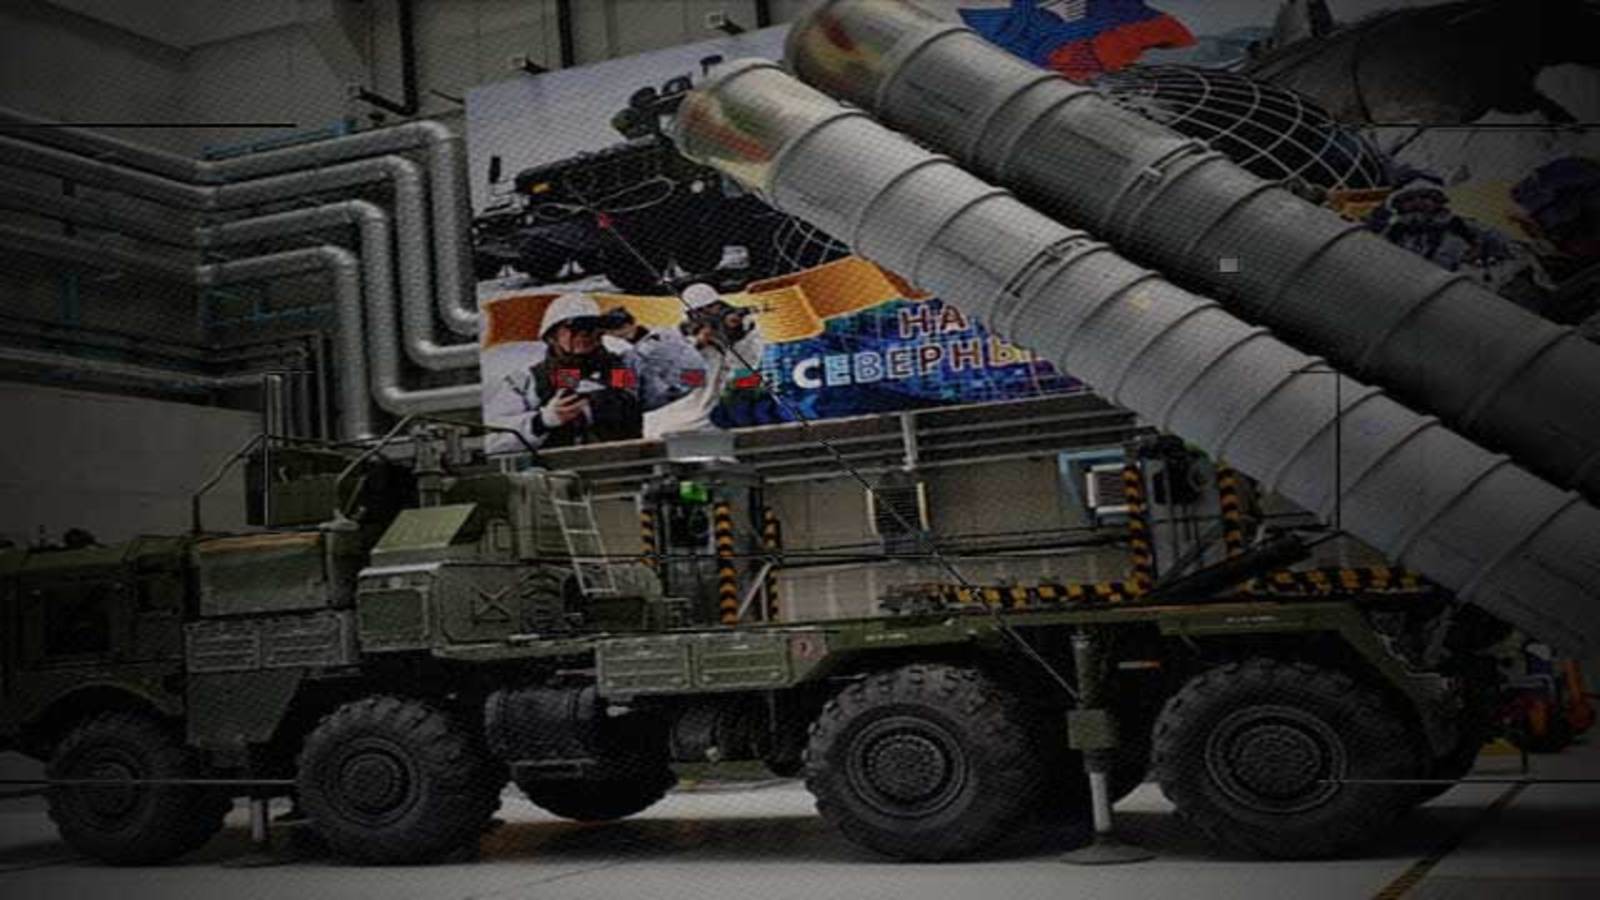 Russia Manufacturing unit: S400 missile system: A look inside the manufacturing unit in Russia